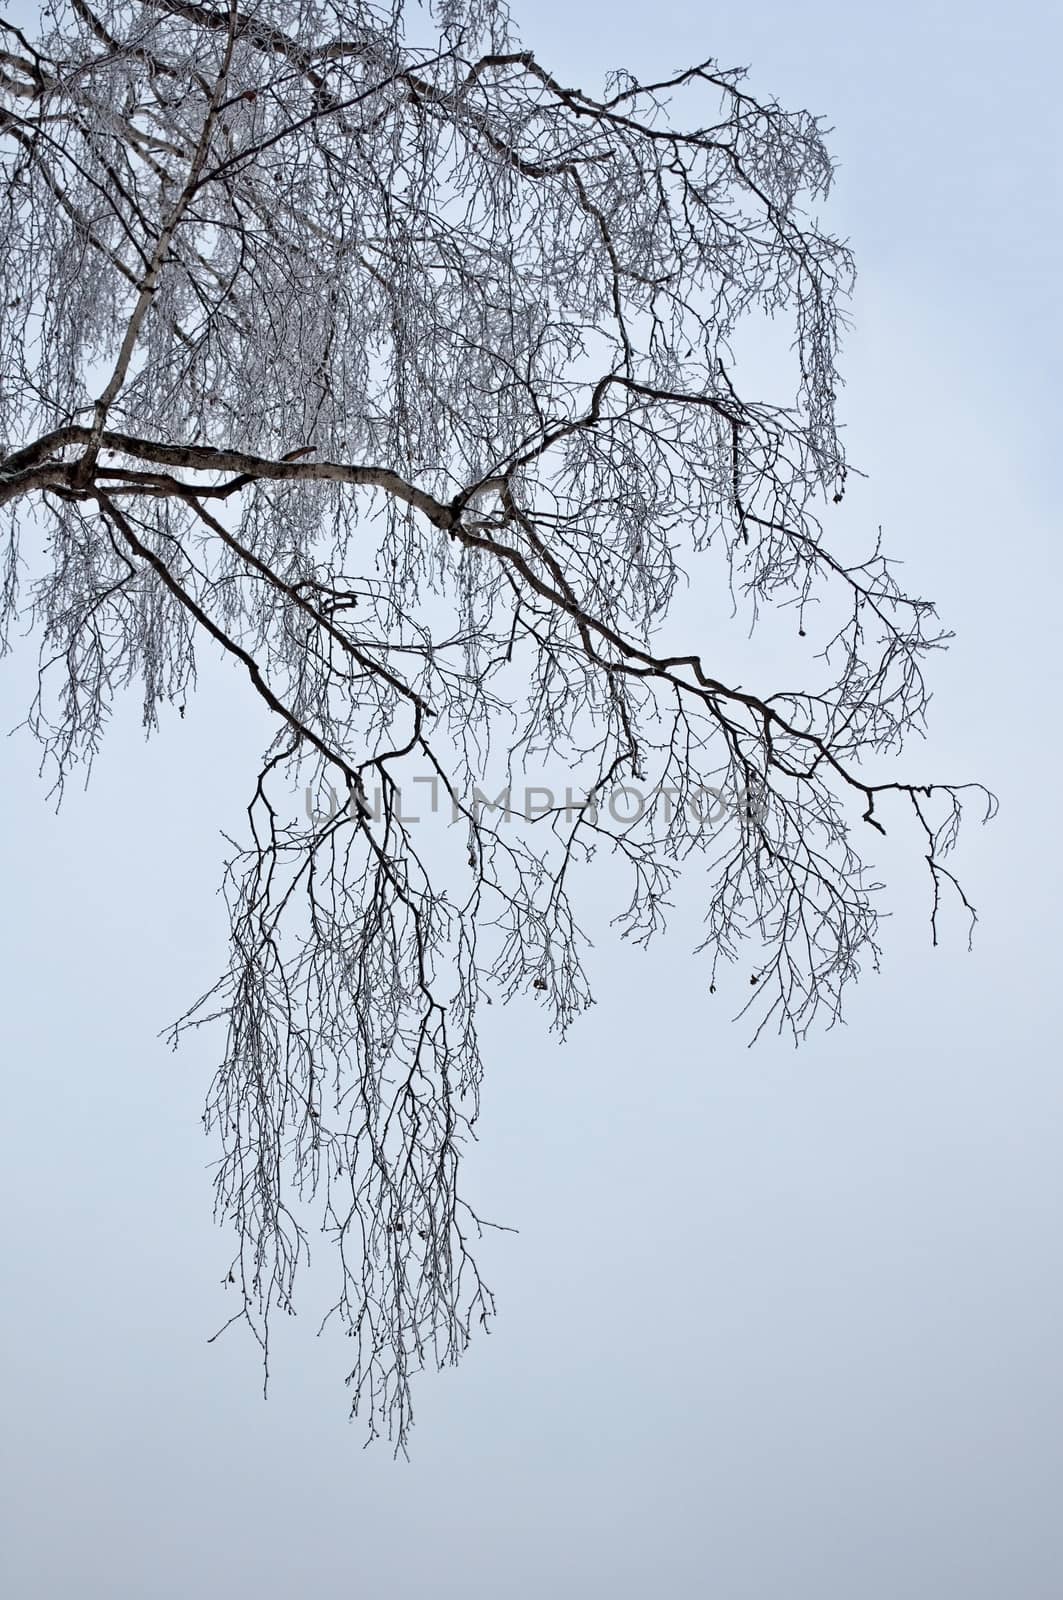 Bare birch branches, gray winter day by wander